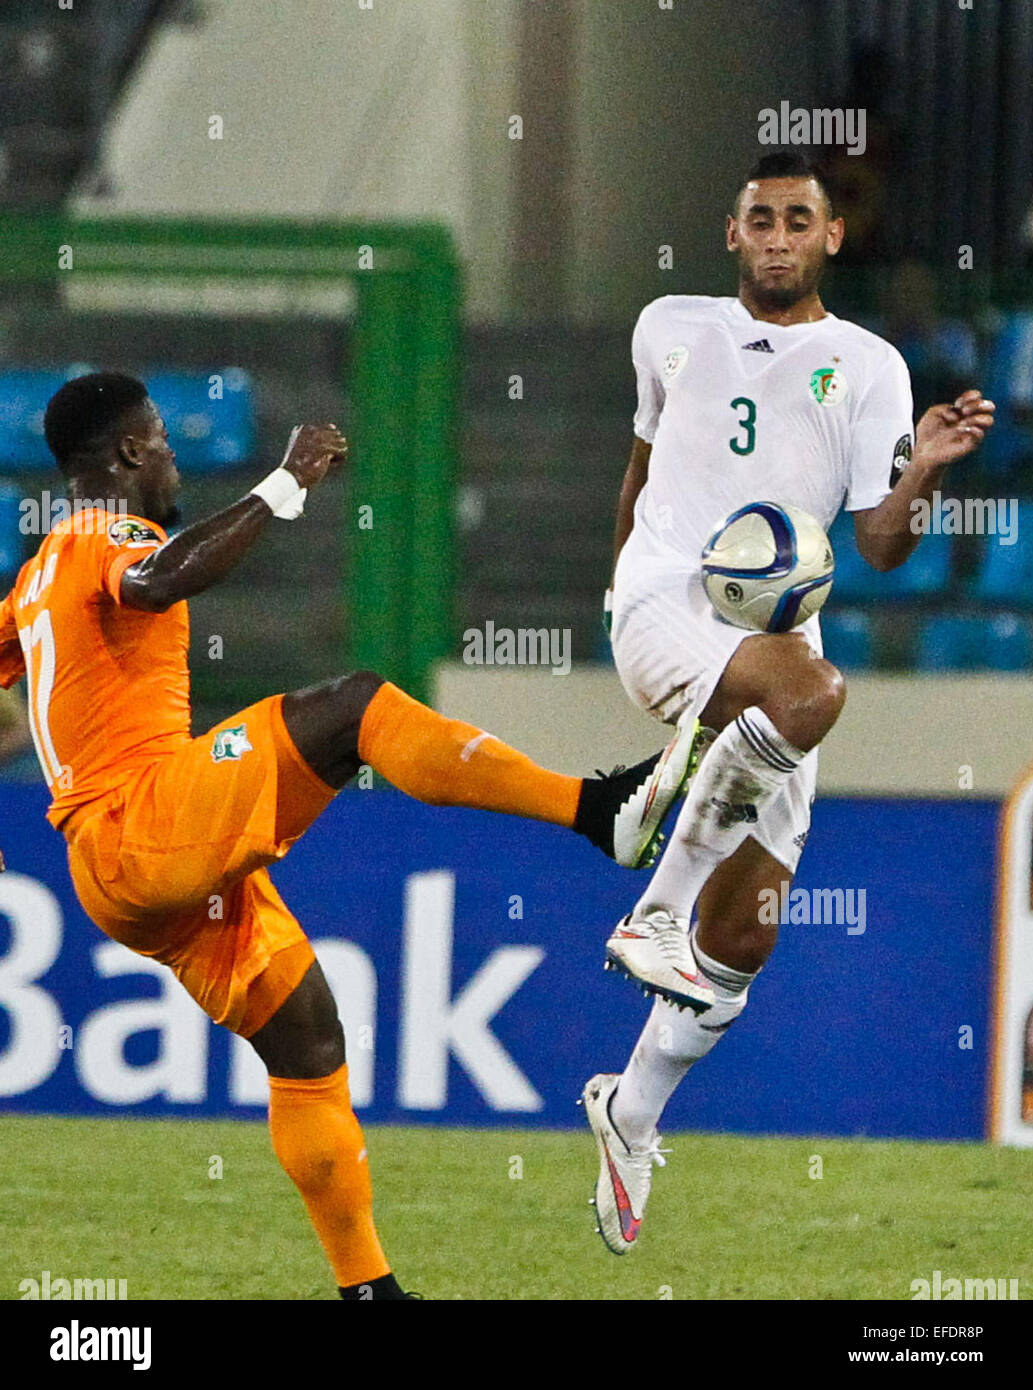 Malabo, Equatorial Guinea. 1st Feb, 2015. Faouzi Ghoulam (R) of Algeria competes during a quarterfinal match of Africa Cup of Nations against Cote d'Ivoire in Malabo, Equatorial Guinea, Feb. 1, 2015. Cote d'Ivoire won 3-1. Credit:  Li Jing/Xinhua/Alamy Live News Stock Photo